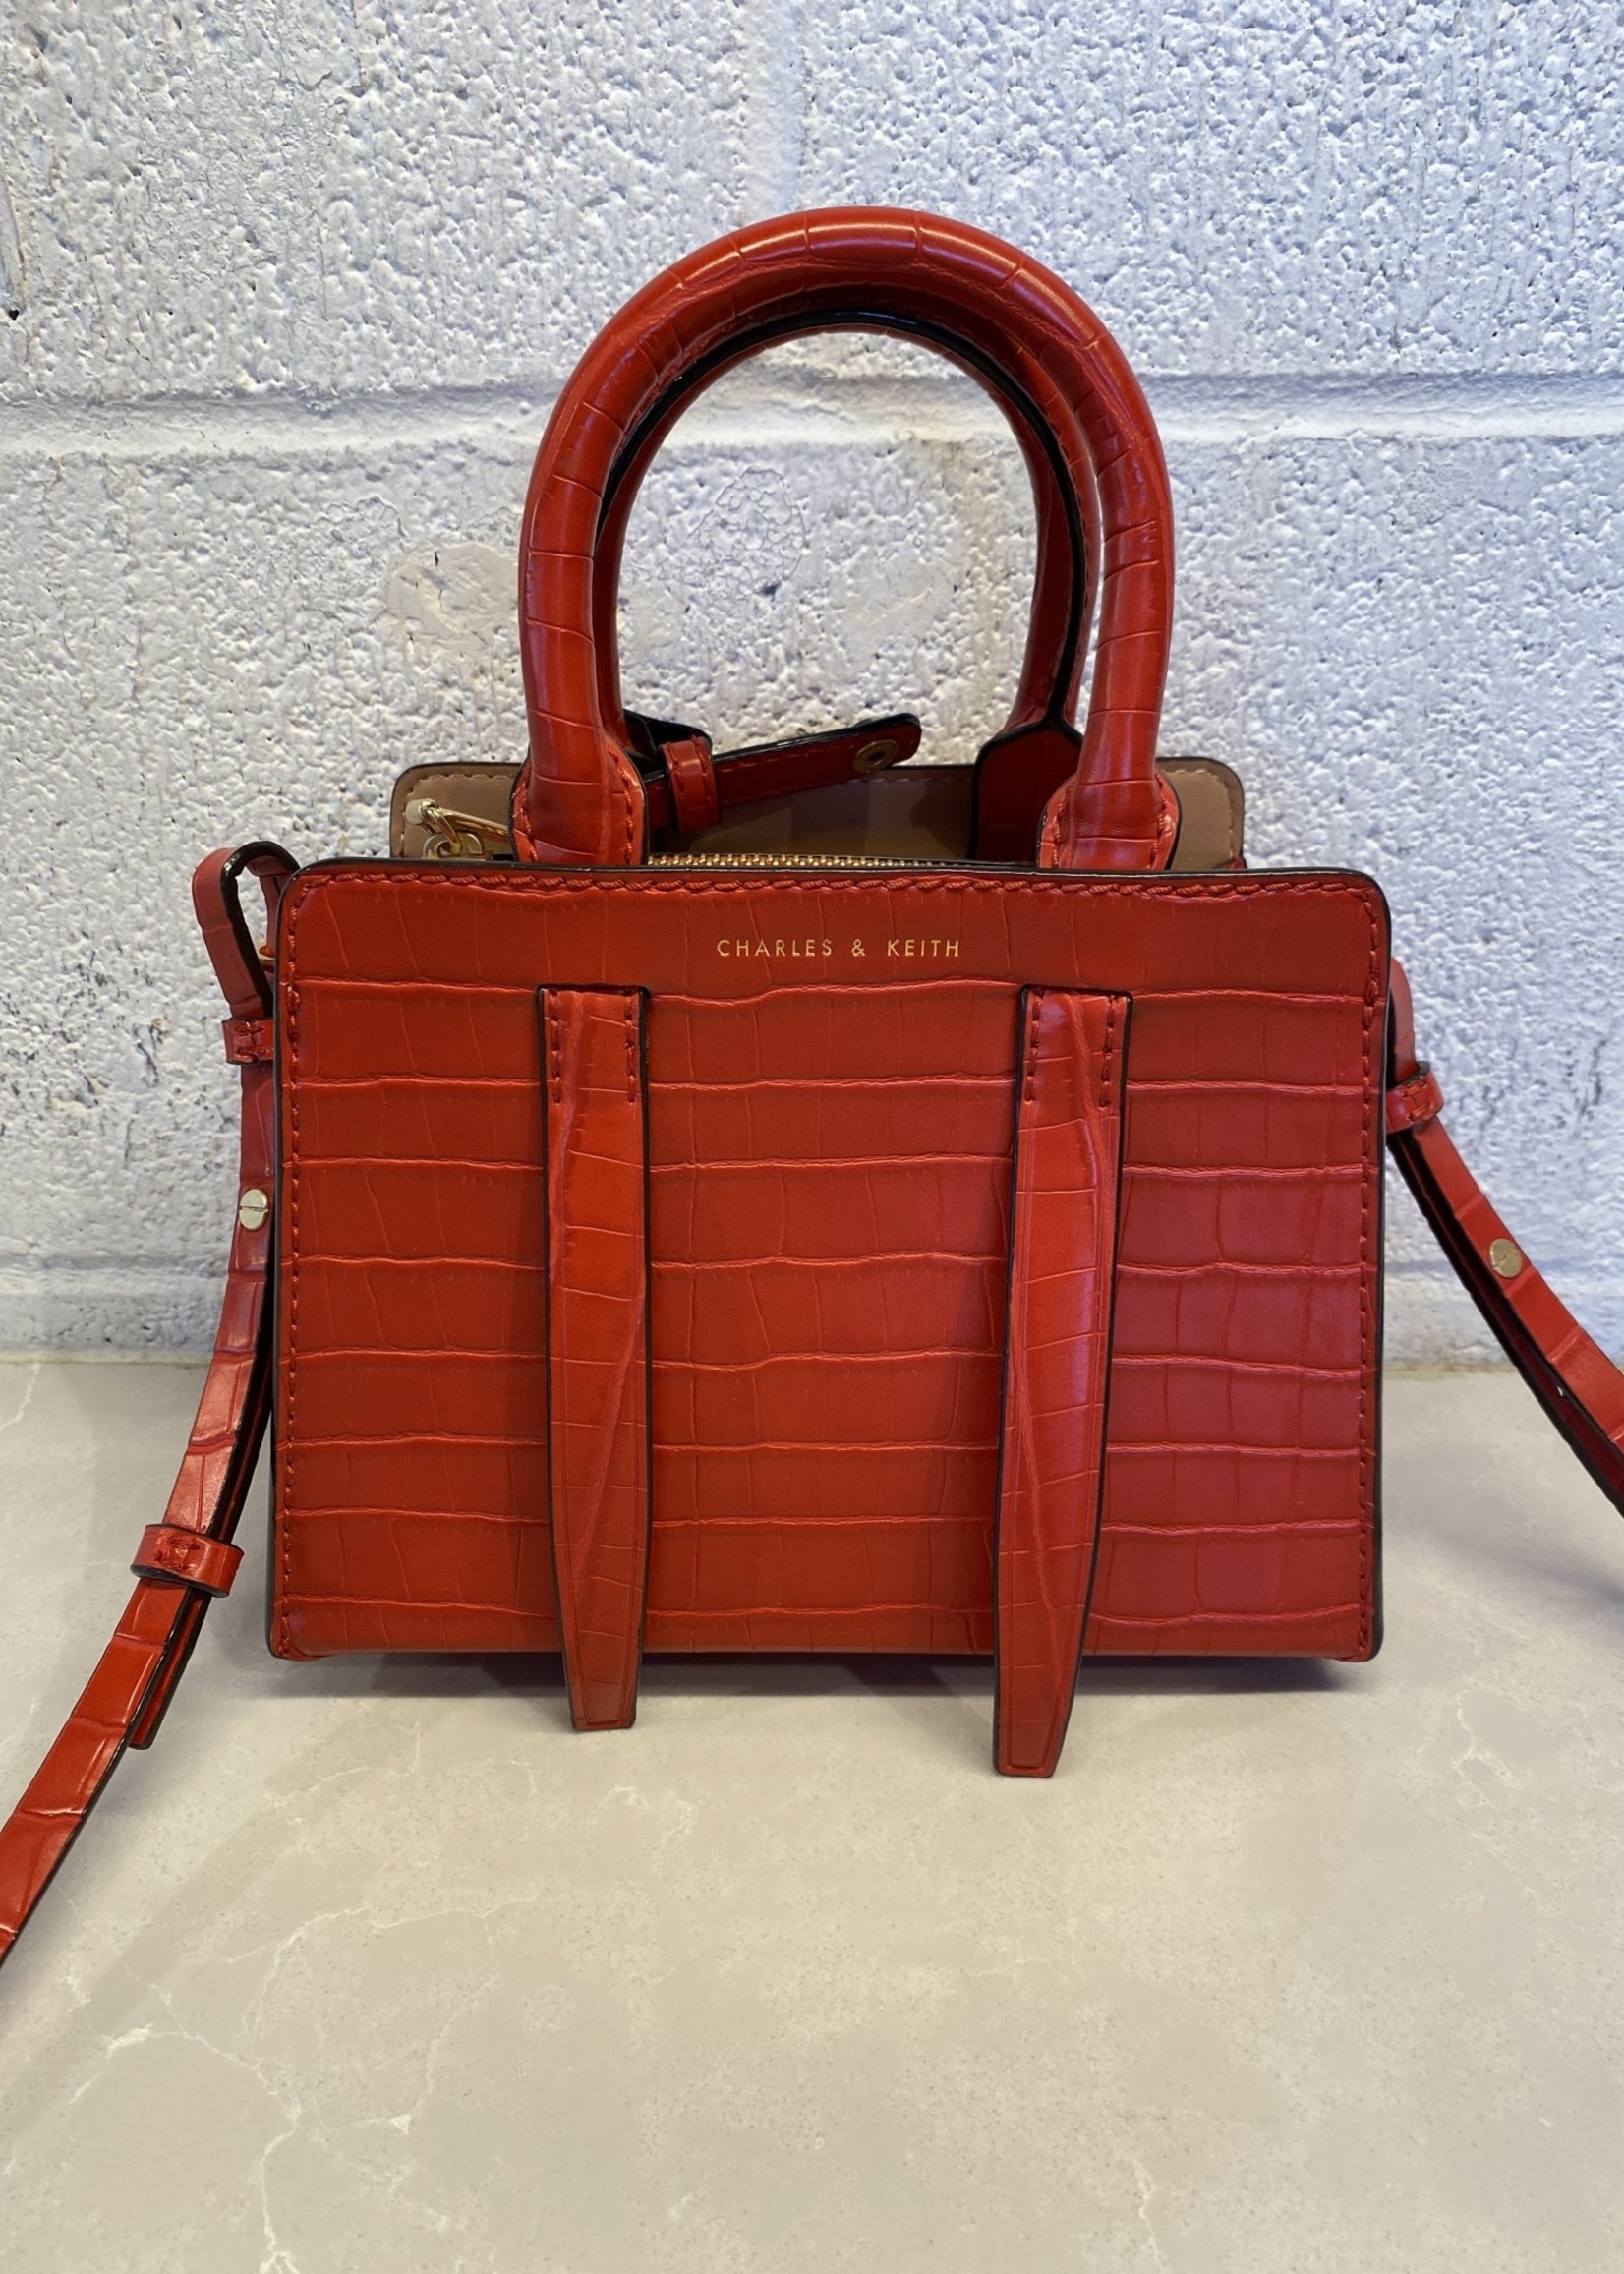 Charles & Keith Red Crossbody